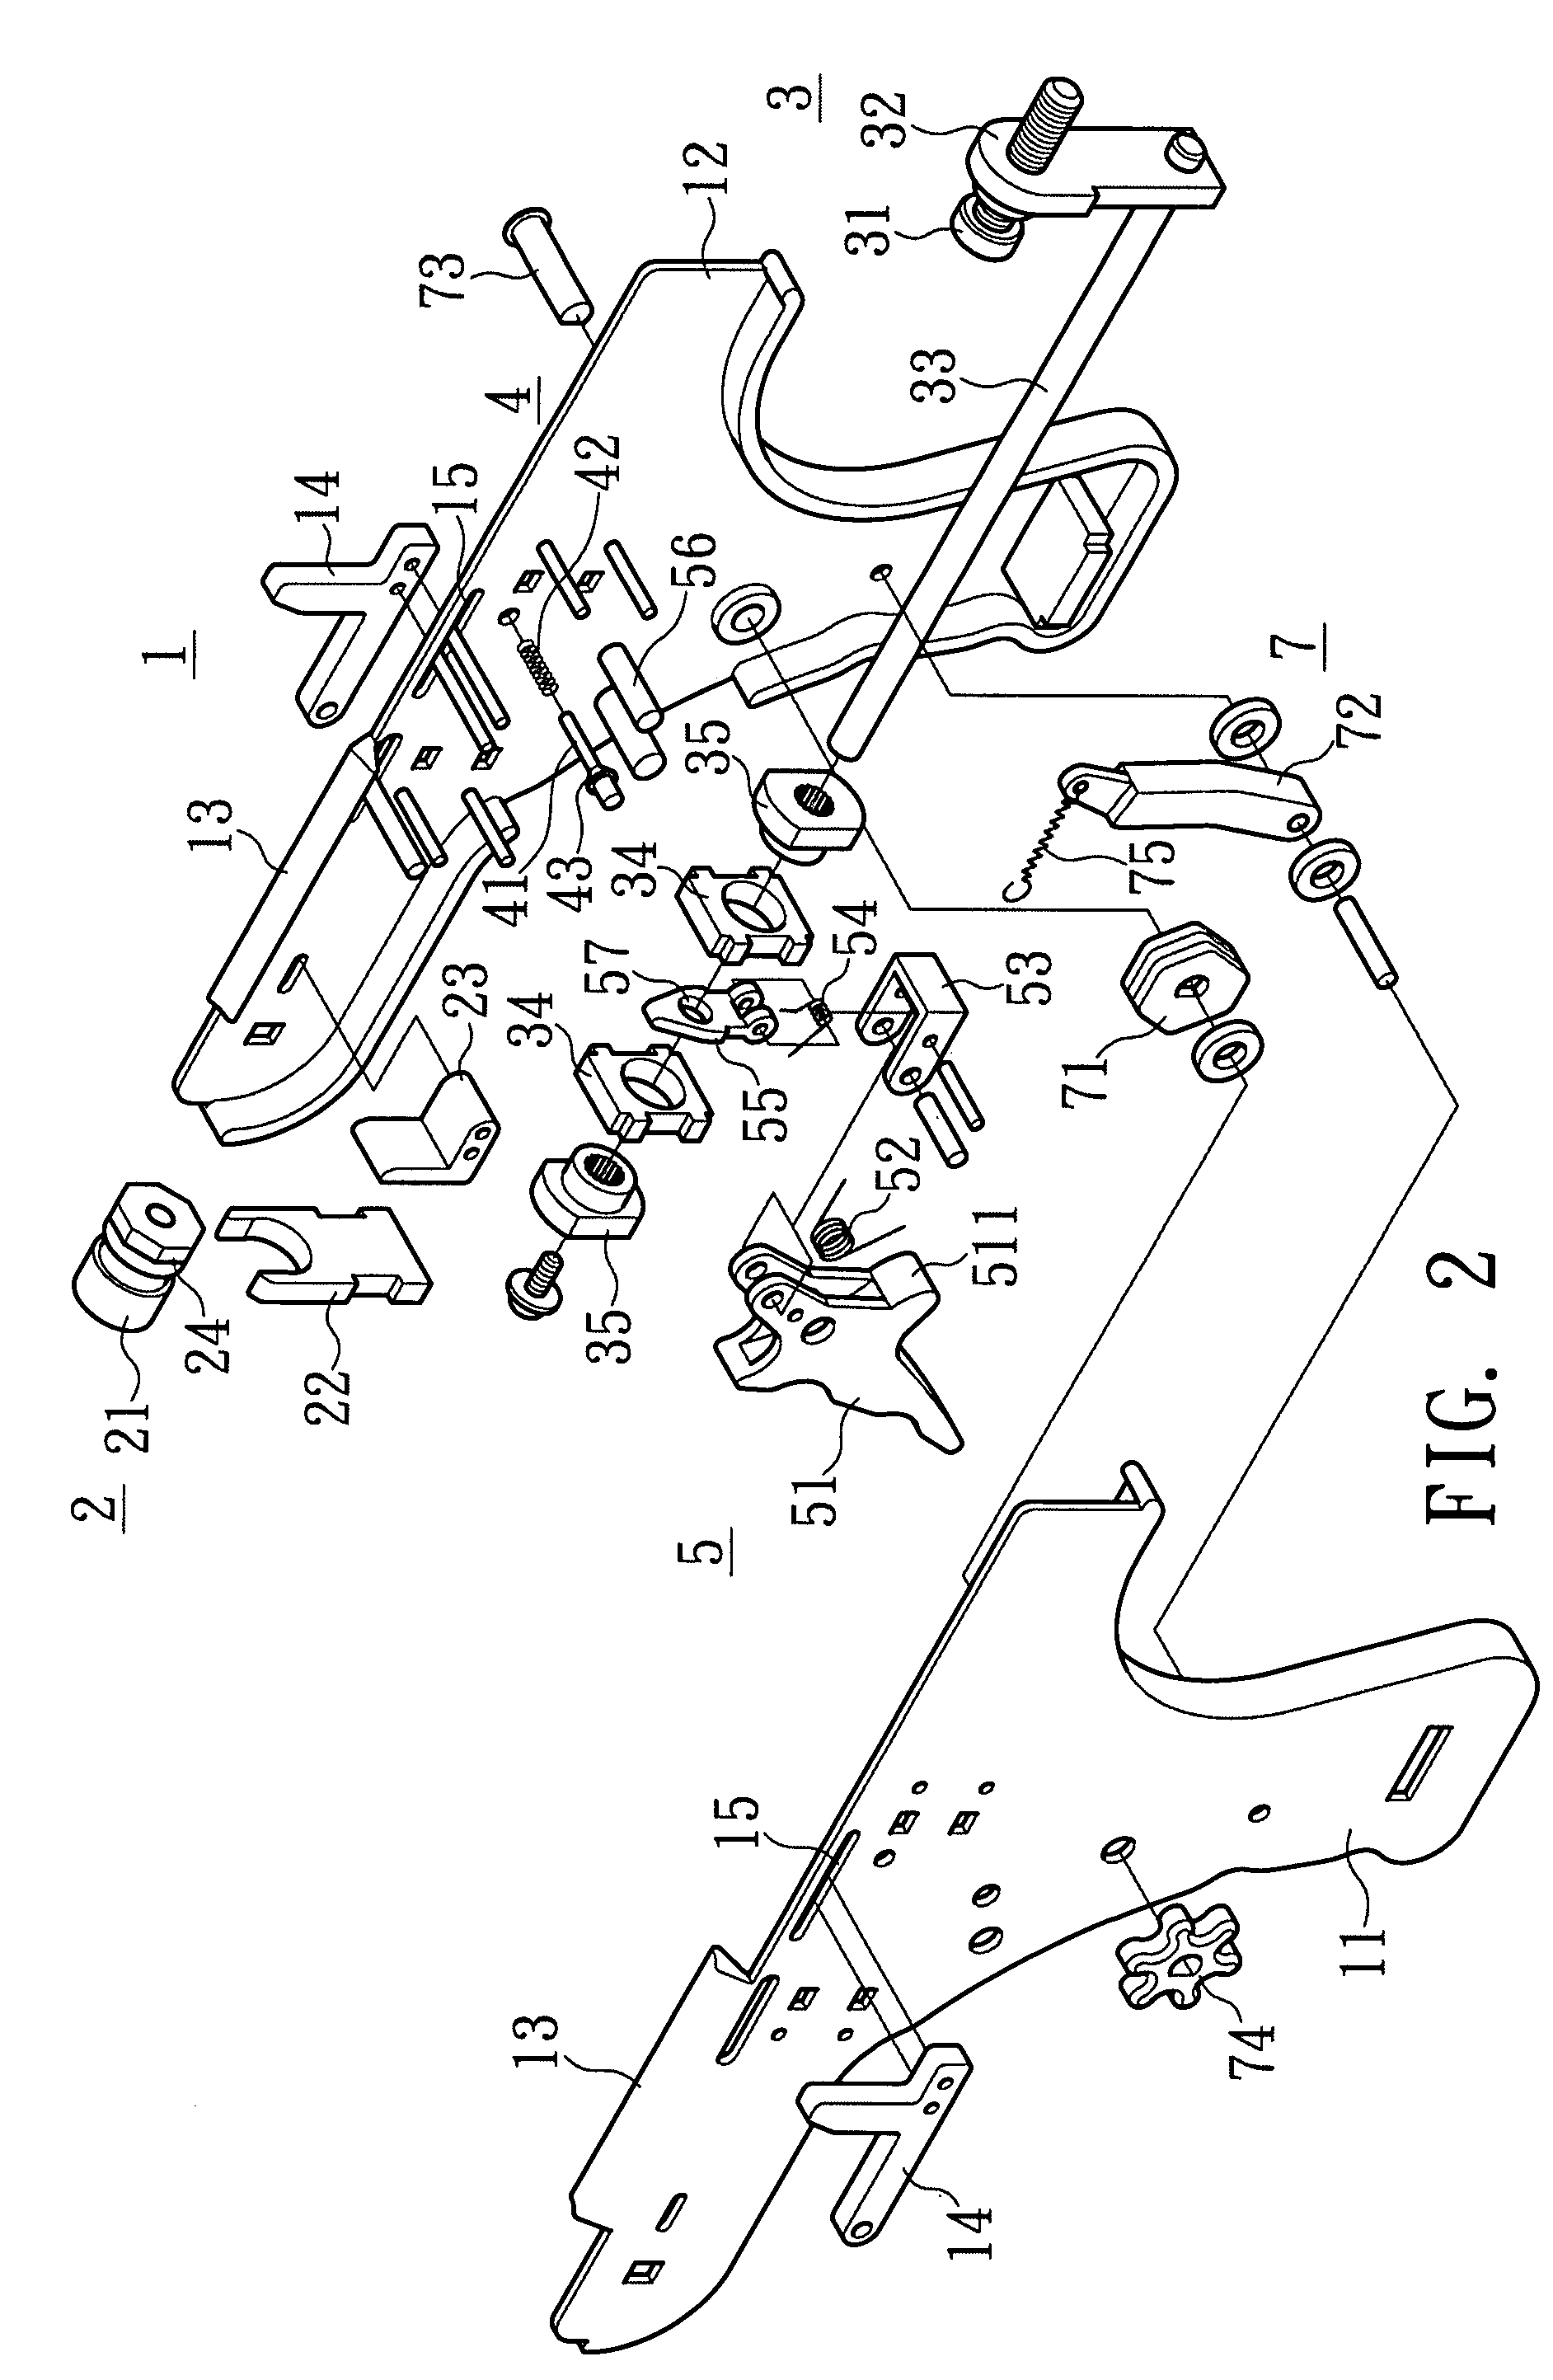 Volume adjustable, micro-injection device